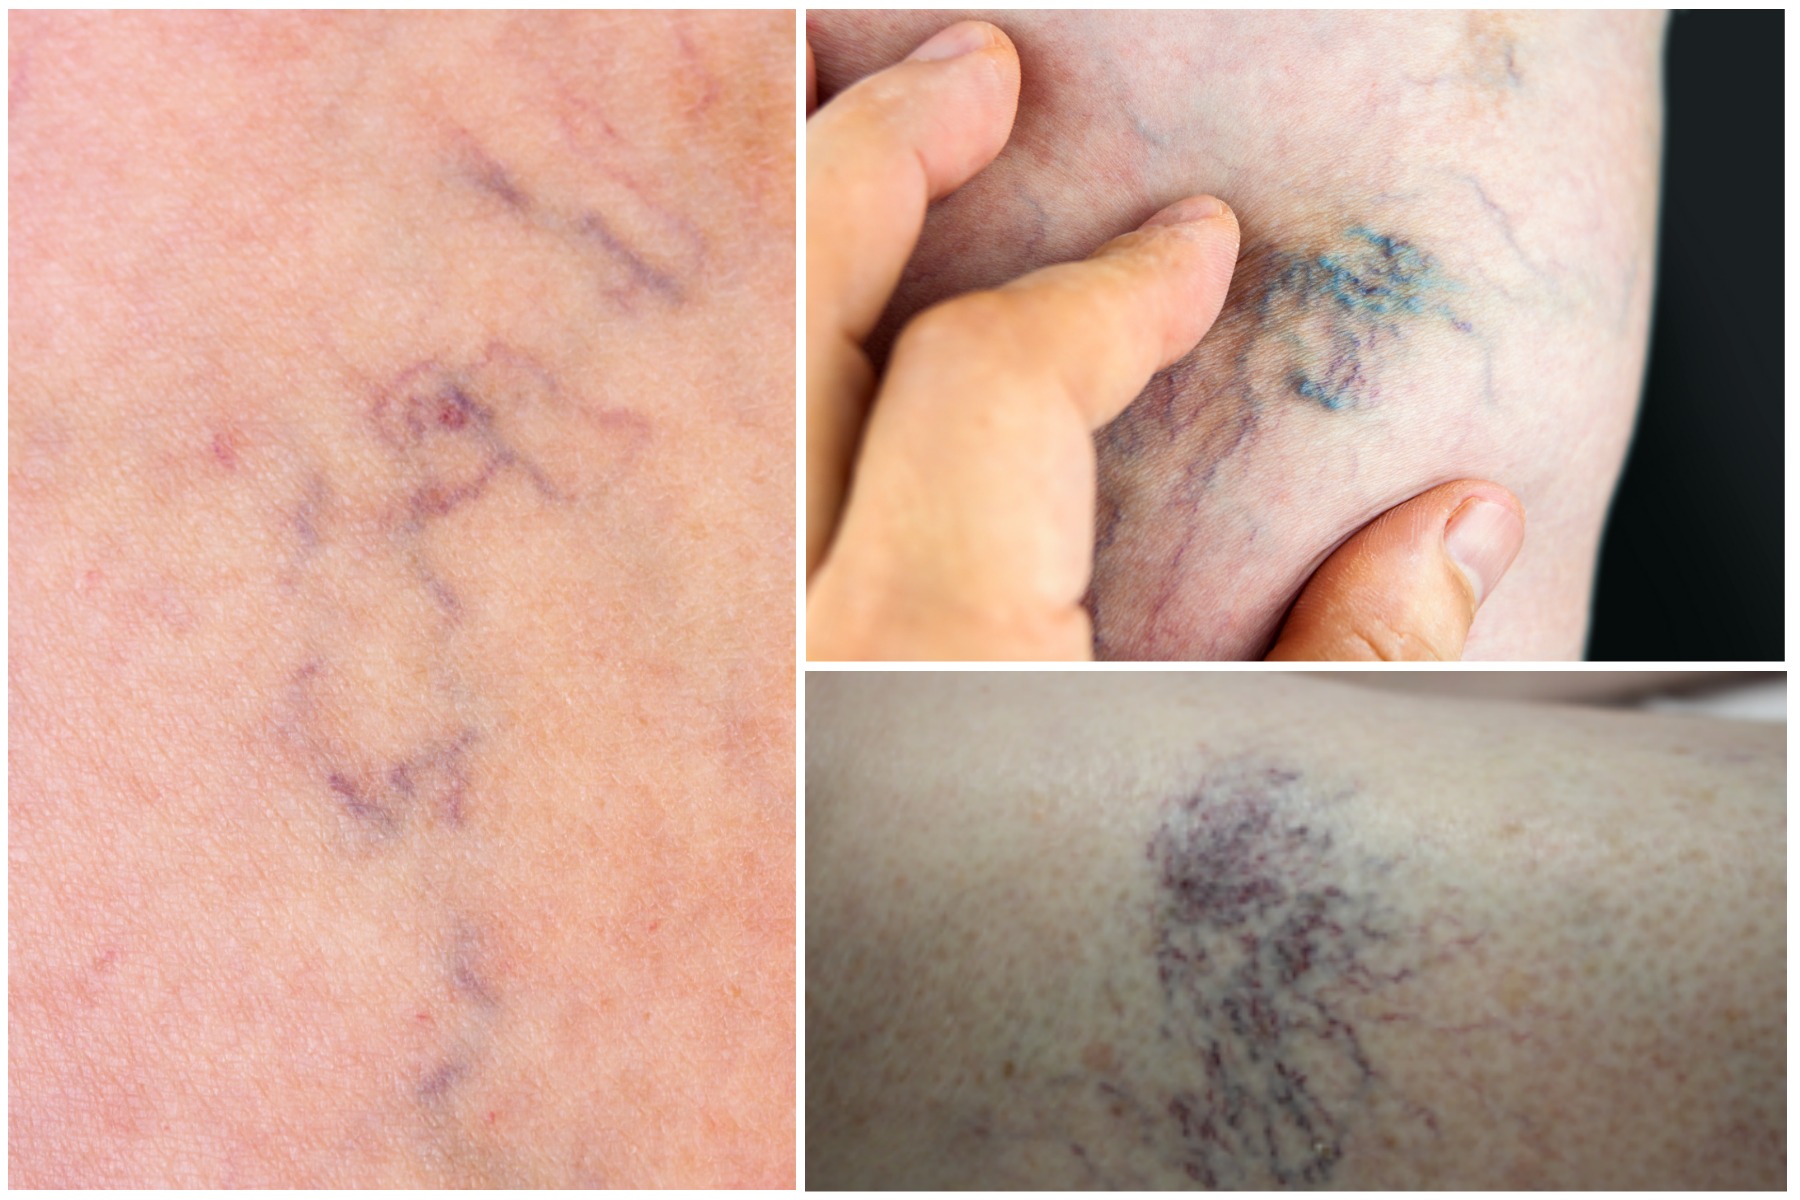 Everything you need to know about spider veins from a doctor who has treated thousands of them